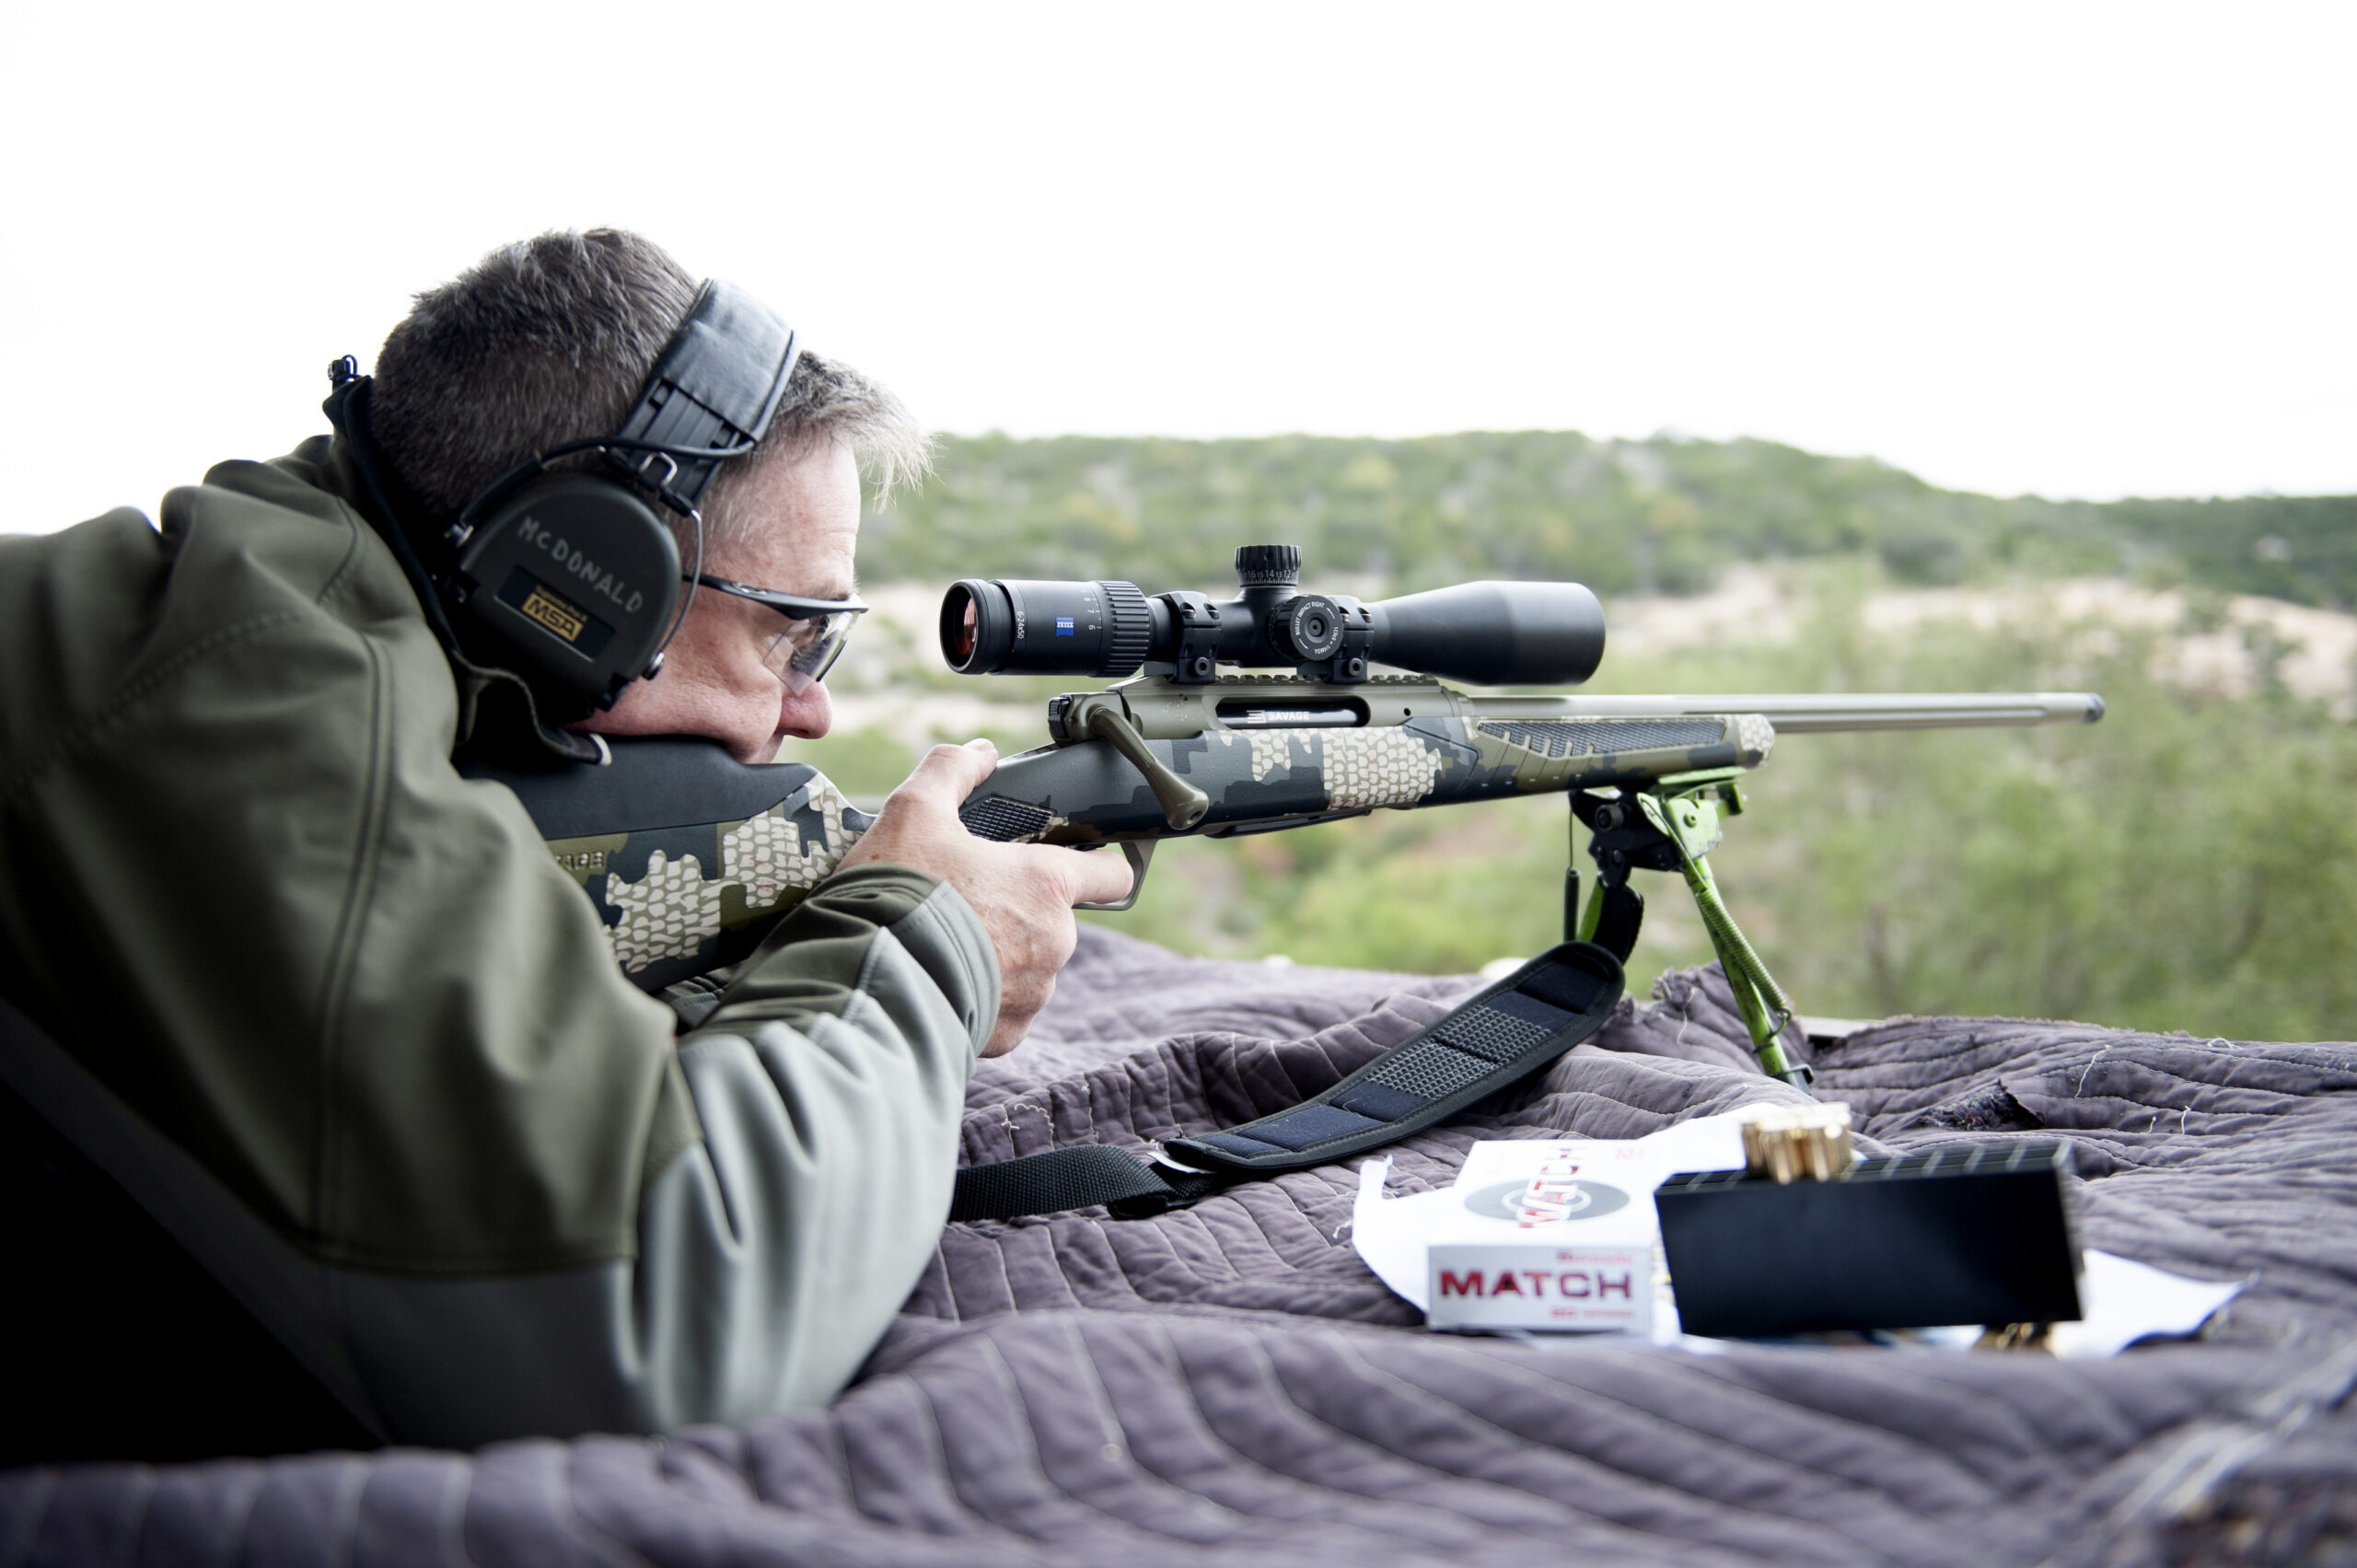 A man with glasses and ear protection lying prone behind a camo rifle on a shooting blanket in rugged country.